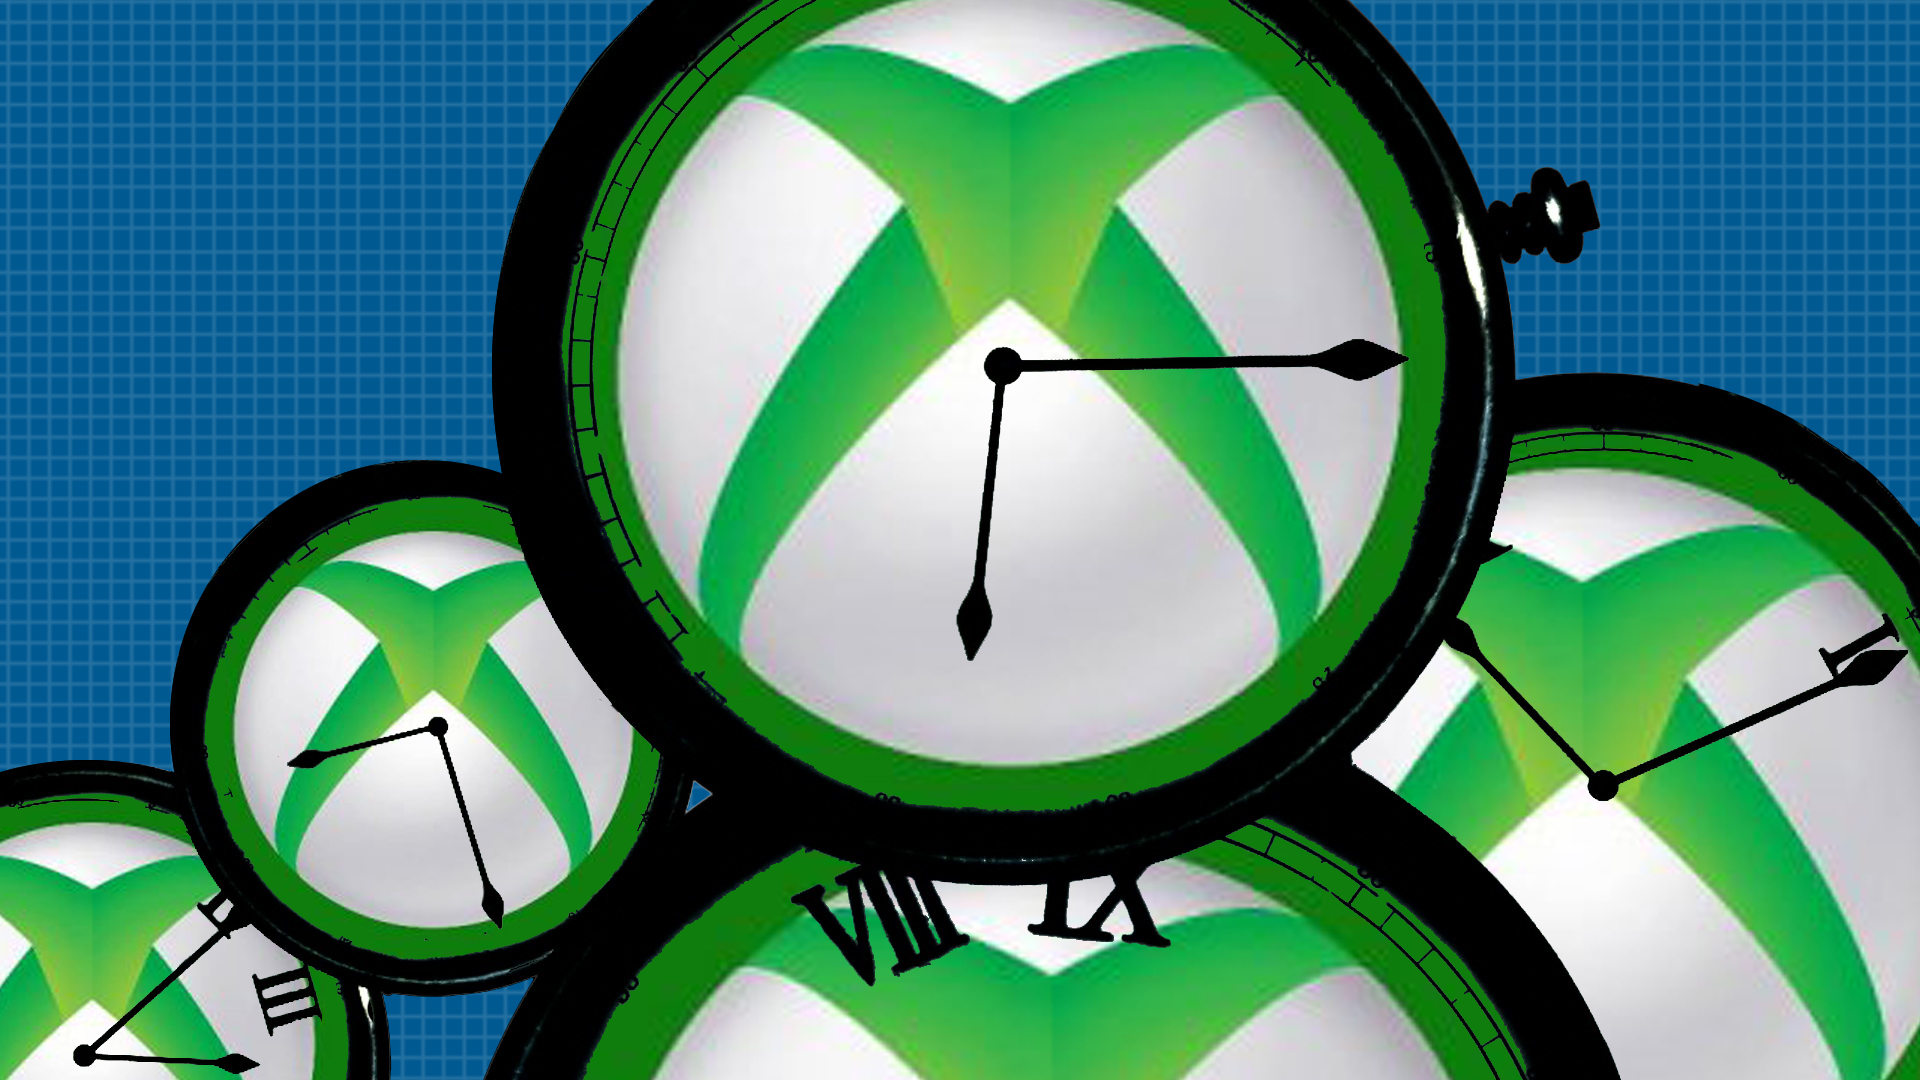 ID@Xbox games will now release at 12:00 am UTC